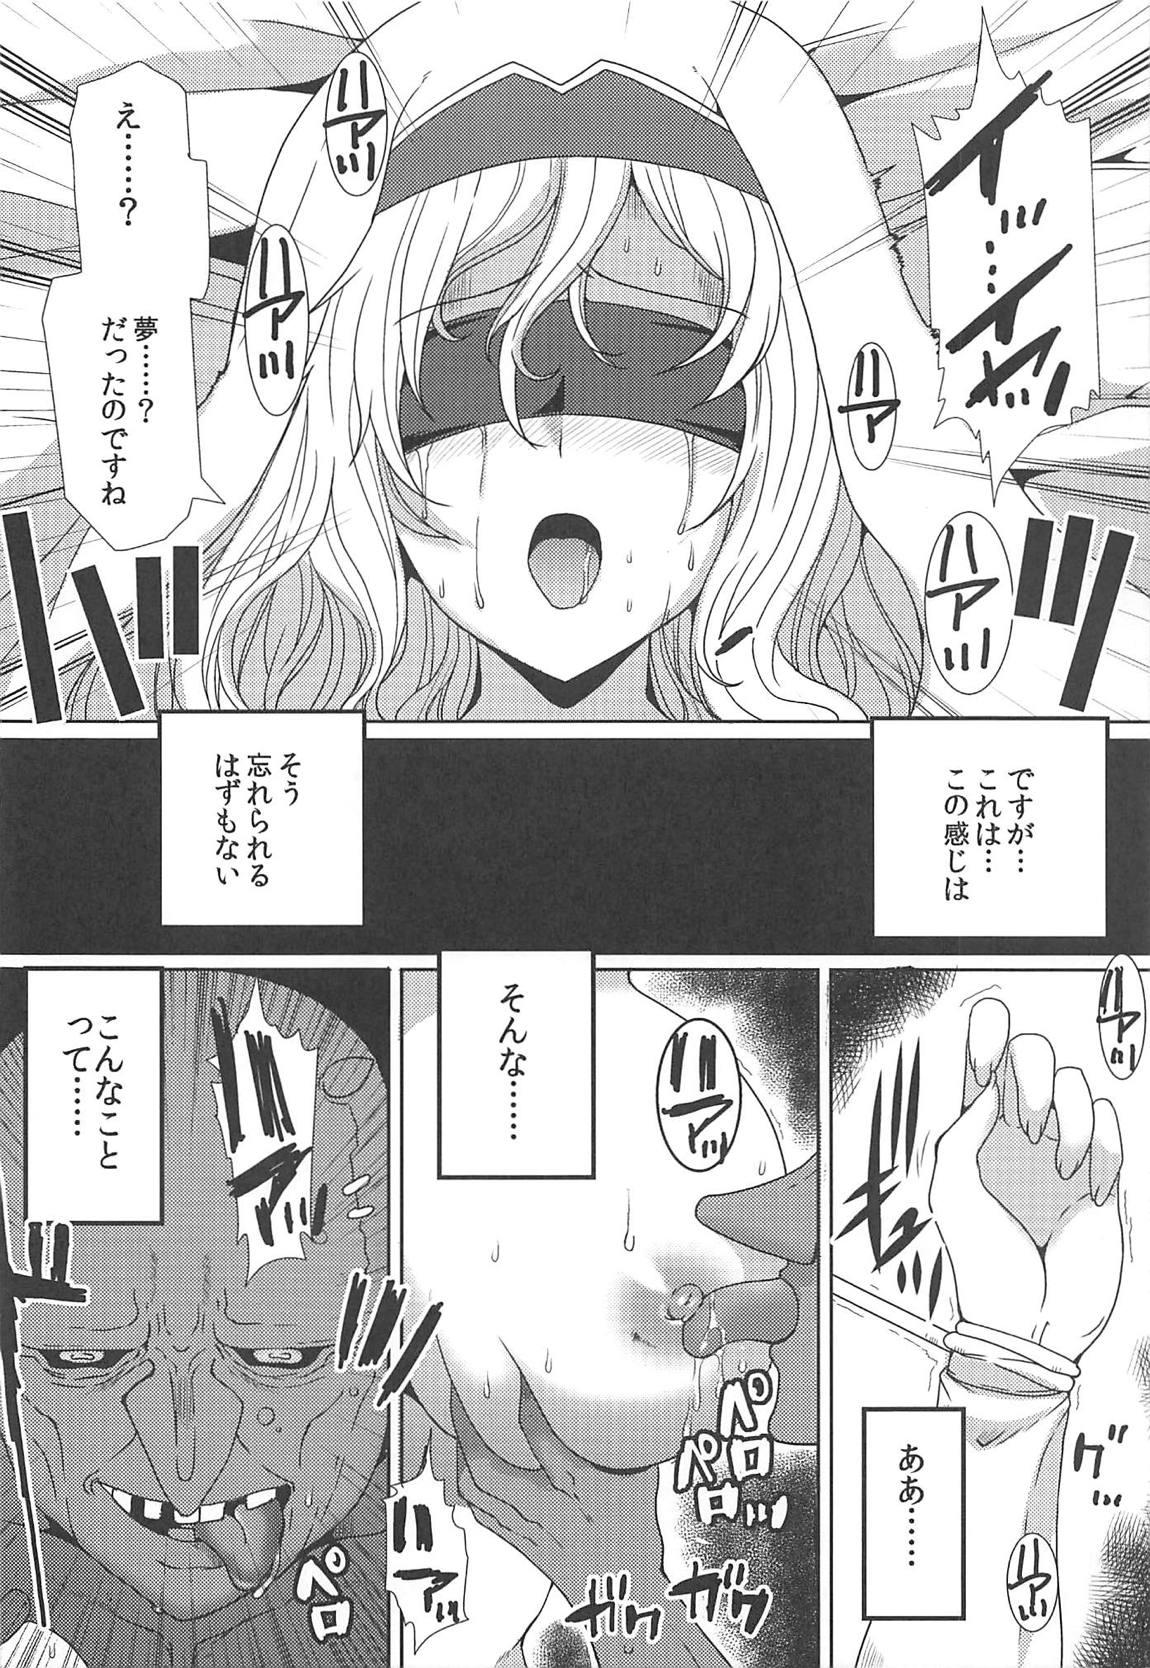 Toys Subete Yo wa Koto mo Nashi - All the world is things even without - Goblin slayer Athletic - Page 9